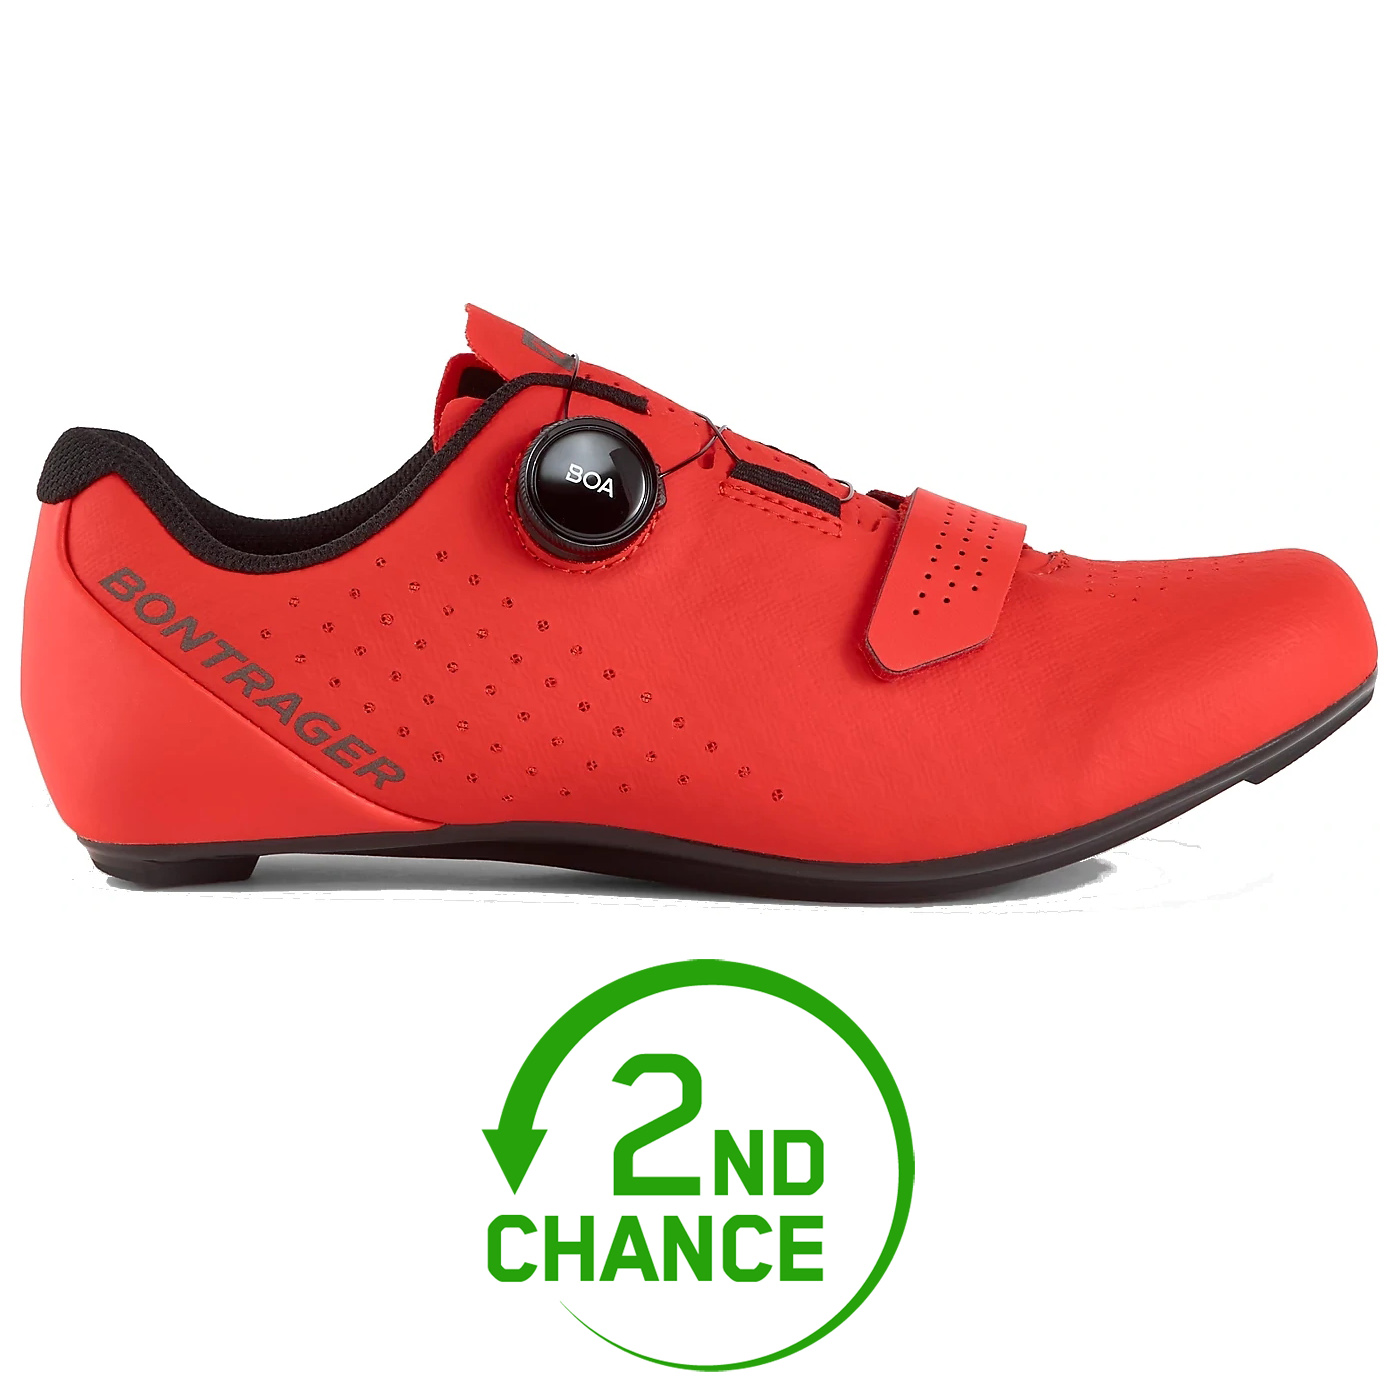 Picture of Bontrager Circuit Road Bike Shoe - red - 2nd Choice